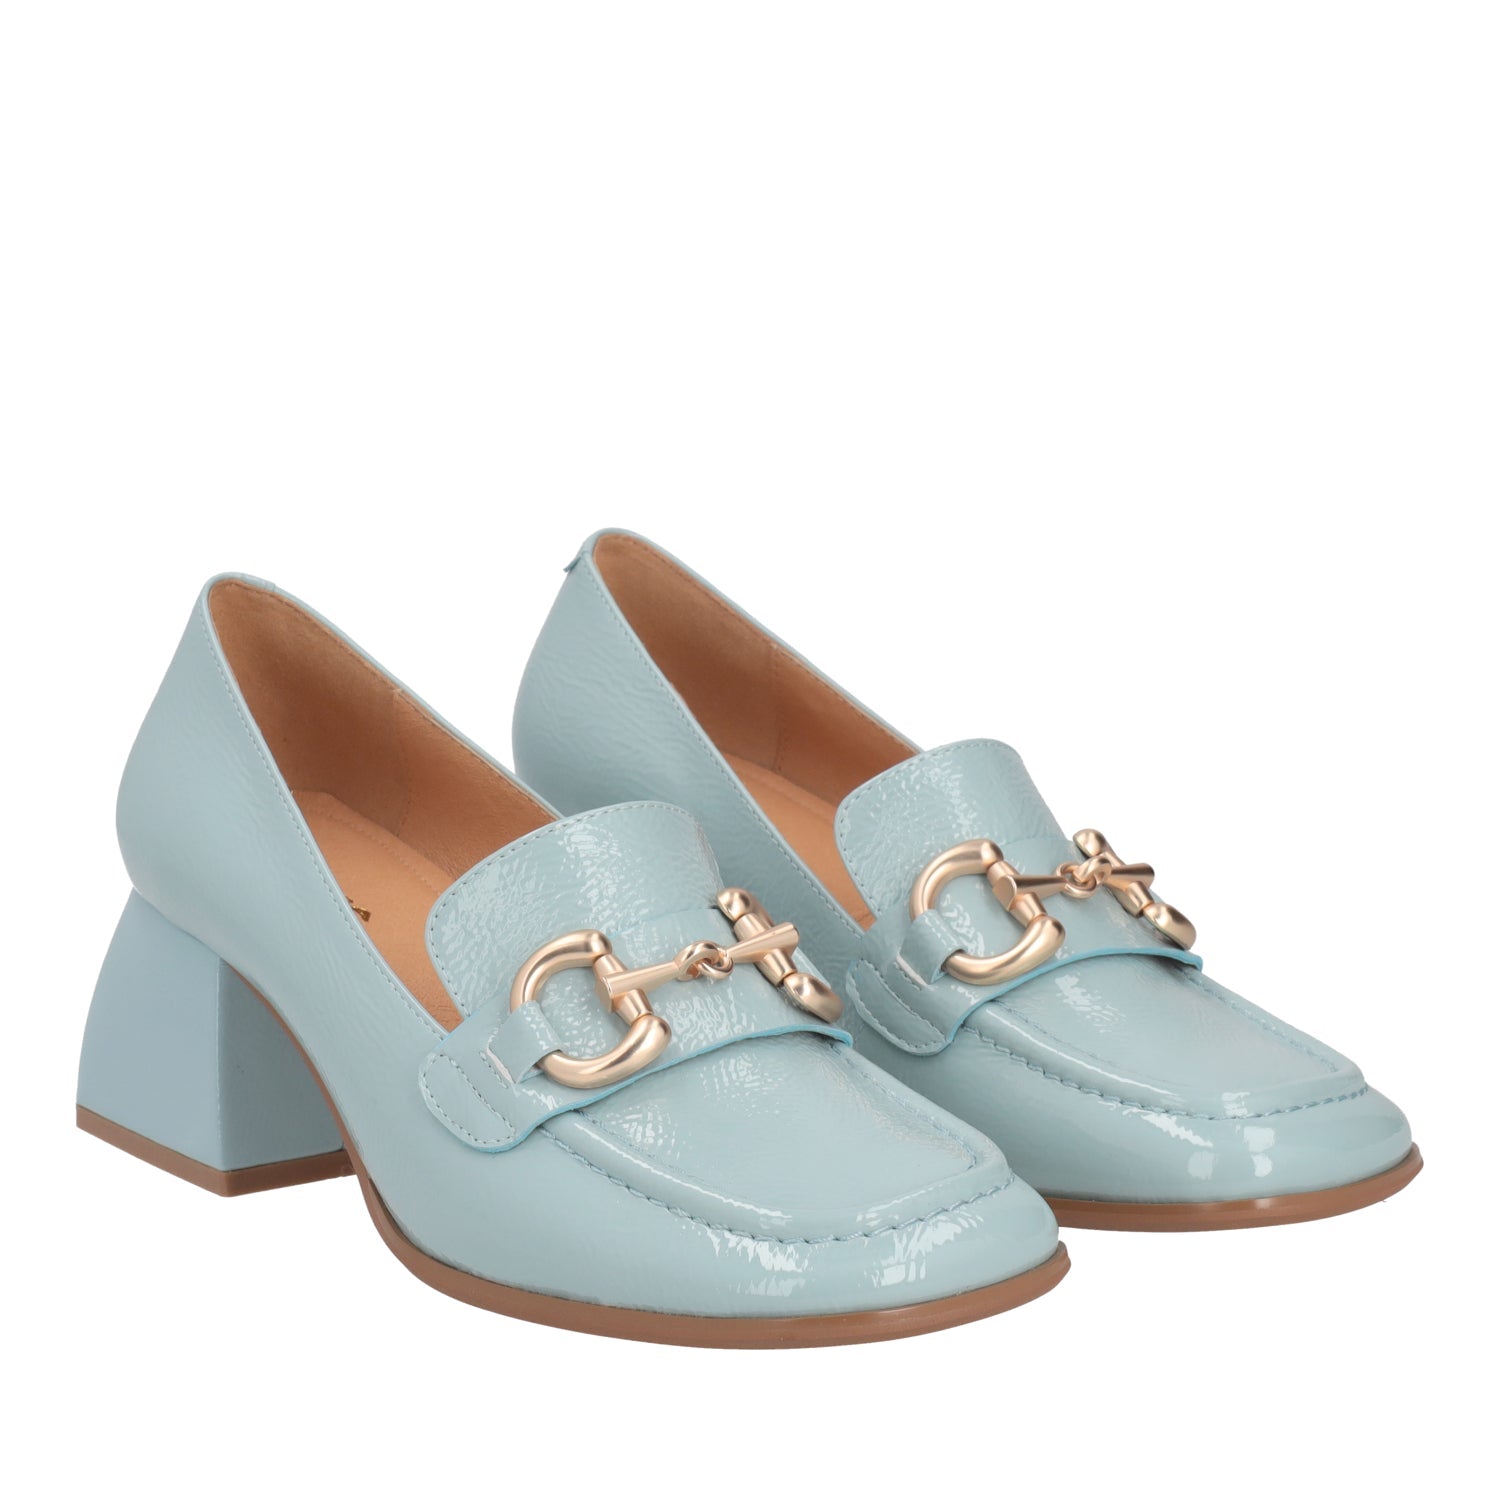 LIGHT BLUE CHANTAL MOCCASIN WITH HEEL